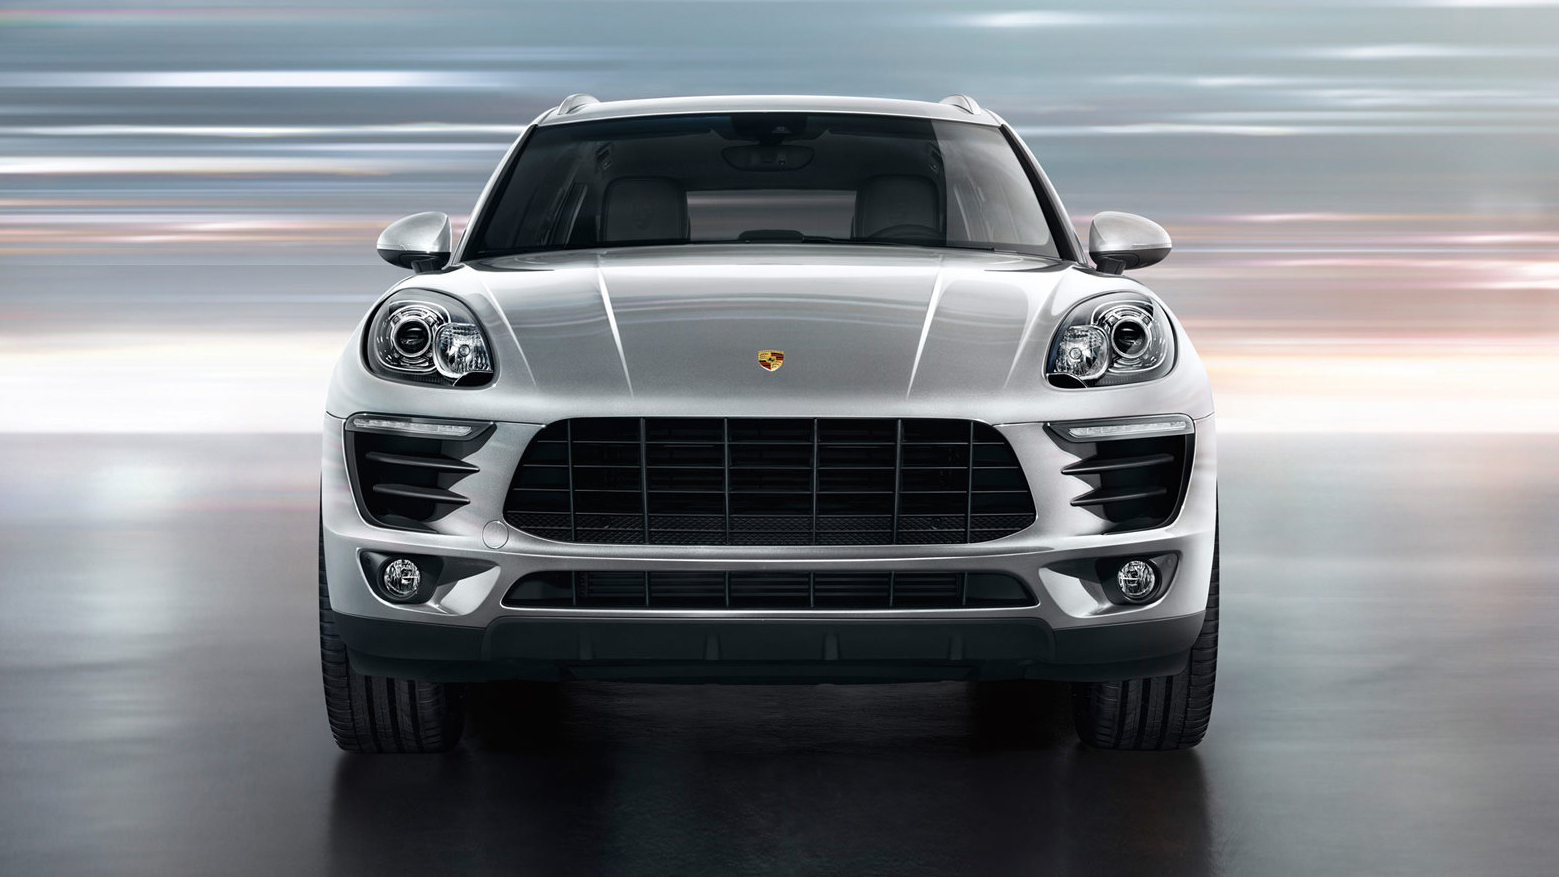 Base Porsche Macan With 237 Hp 2 Liter Turbo Revealed Autoevolution